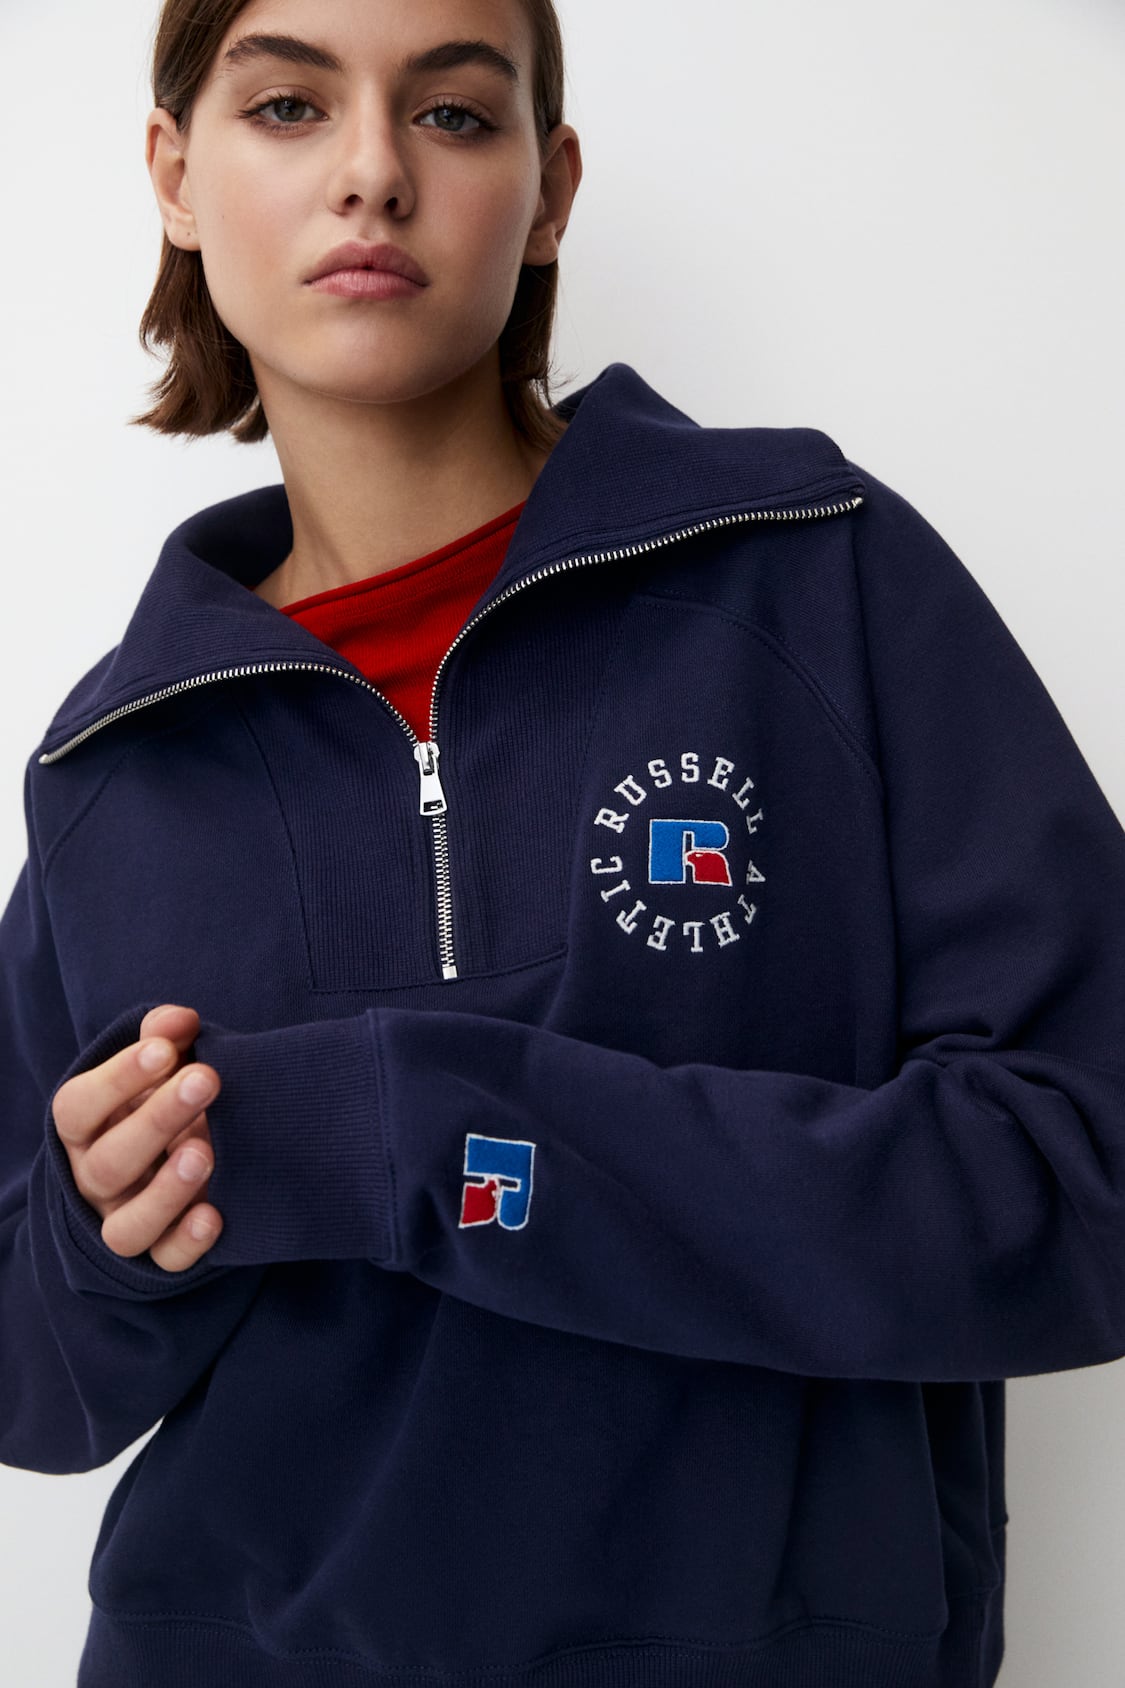 Russell Athletic by P&B sweatshirt with zip - PULL&BEAR